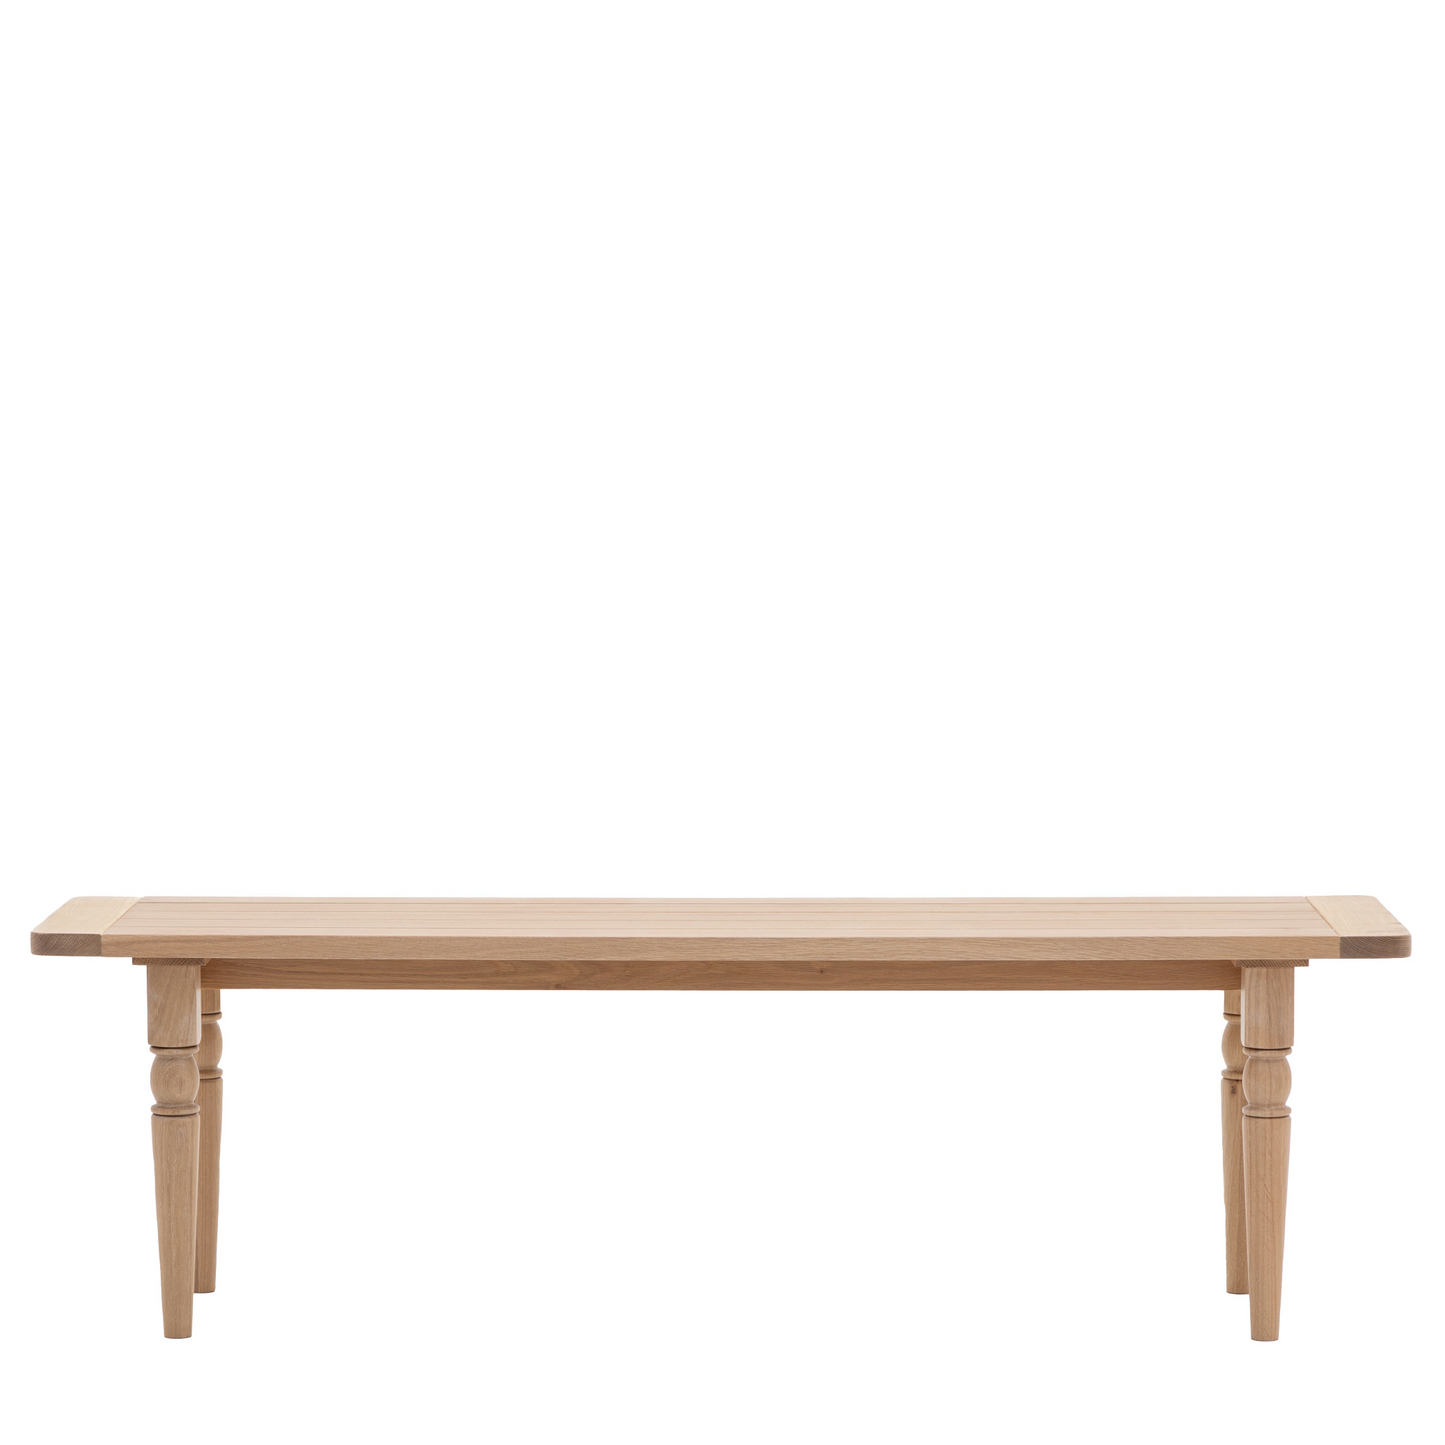 A Buckland Dining Bench in Oak, ideal for interior decor and home furniture.